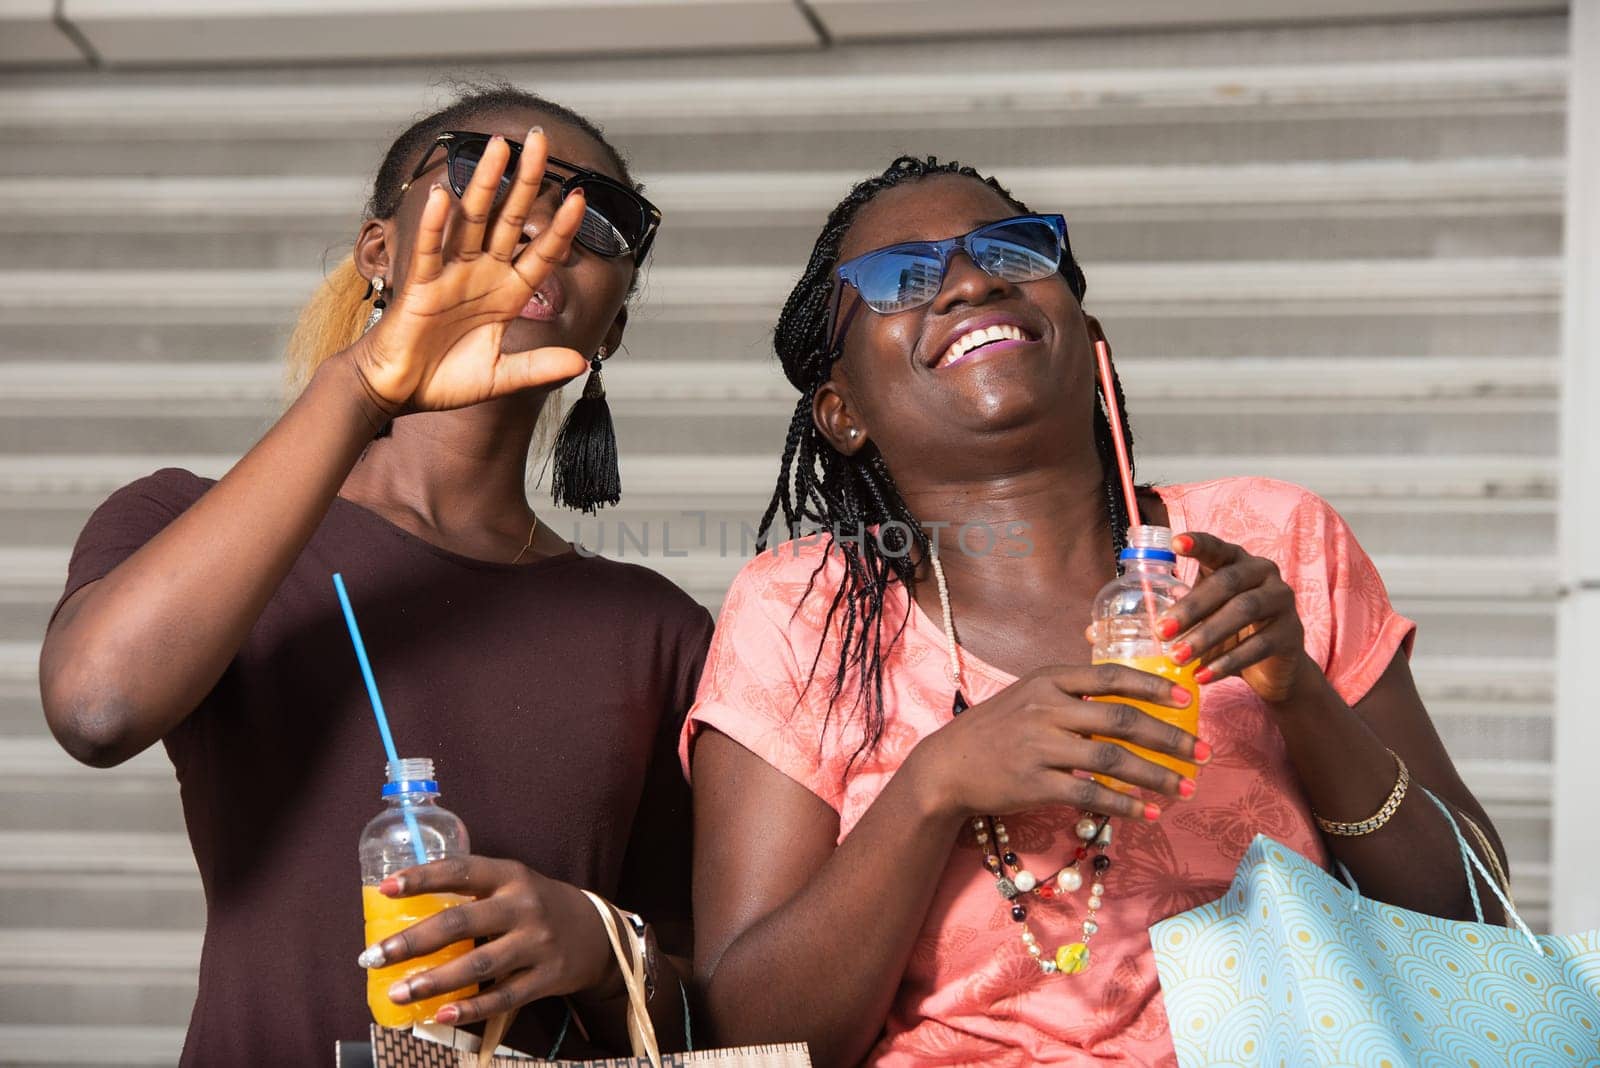 Young girls standing in glasses looking up laughing with bottles of juice in hand after shopping.